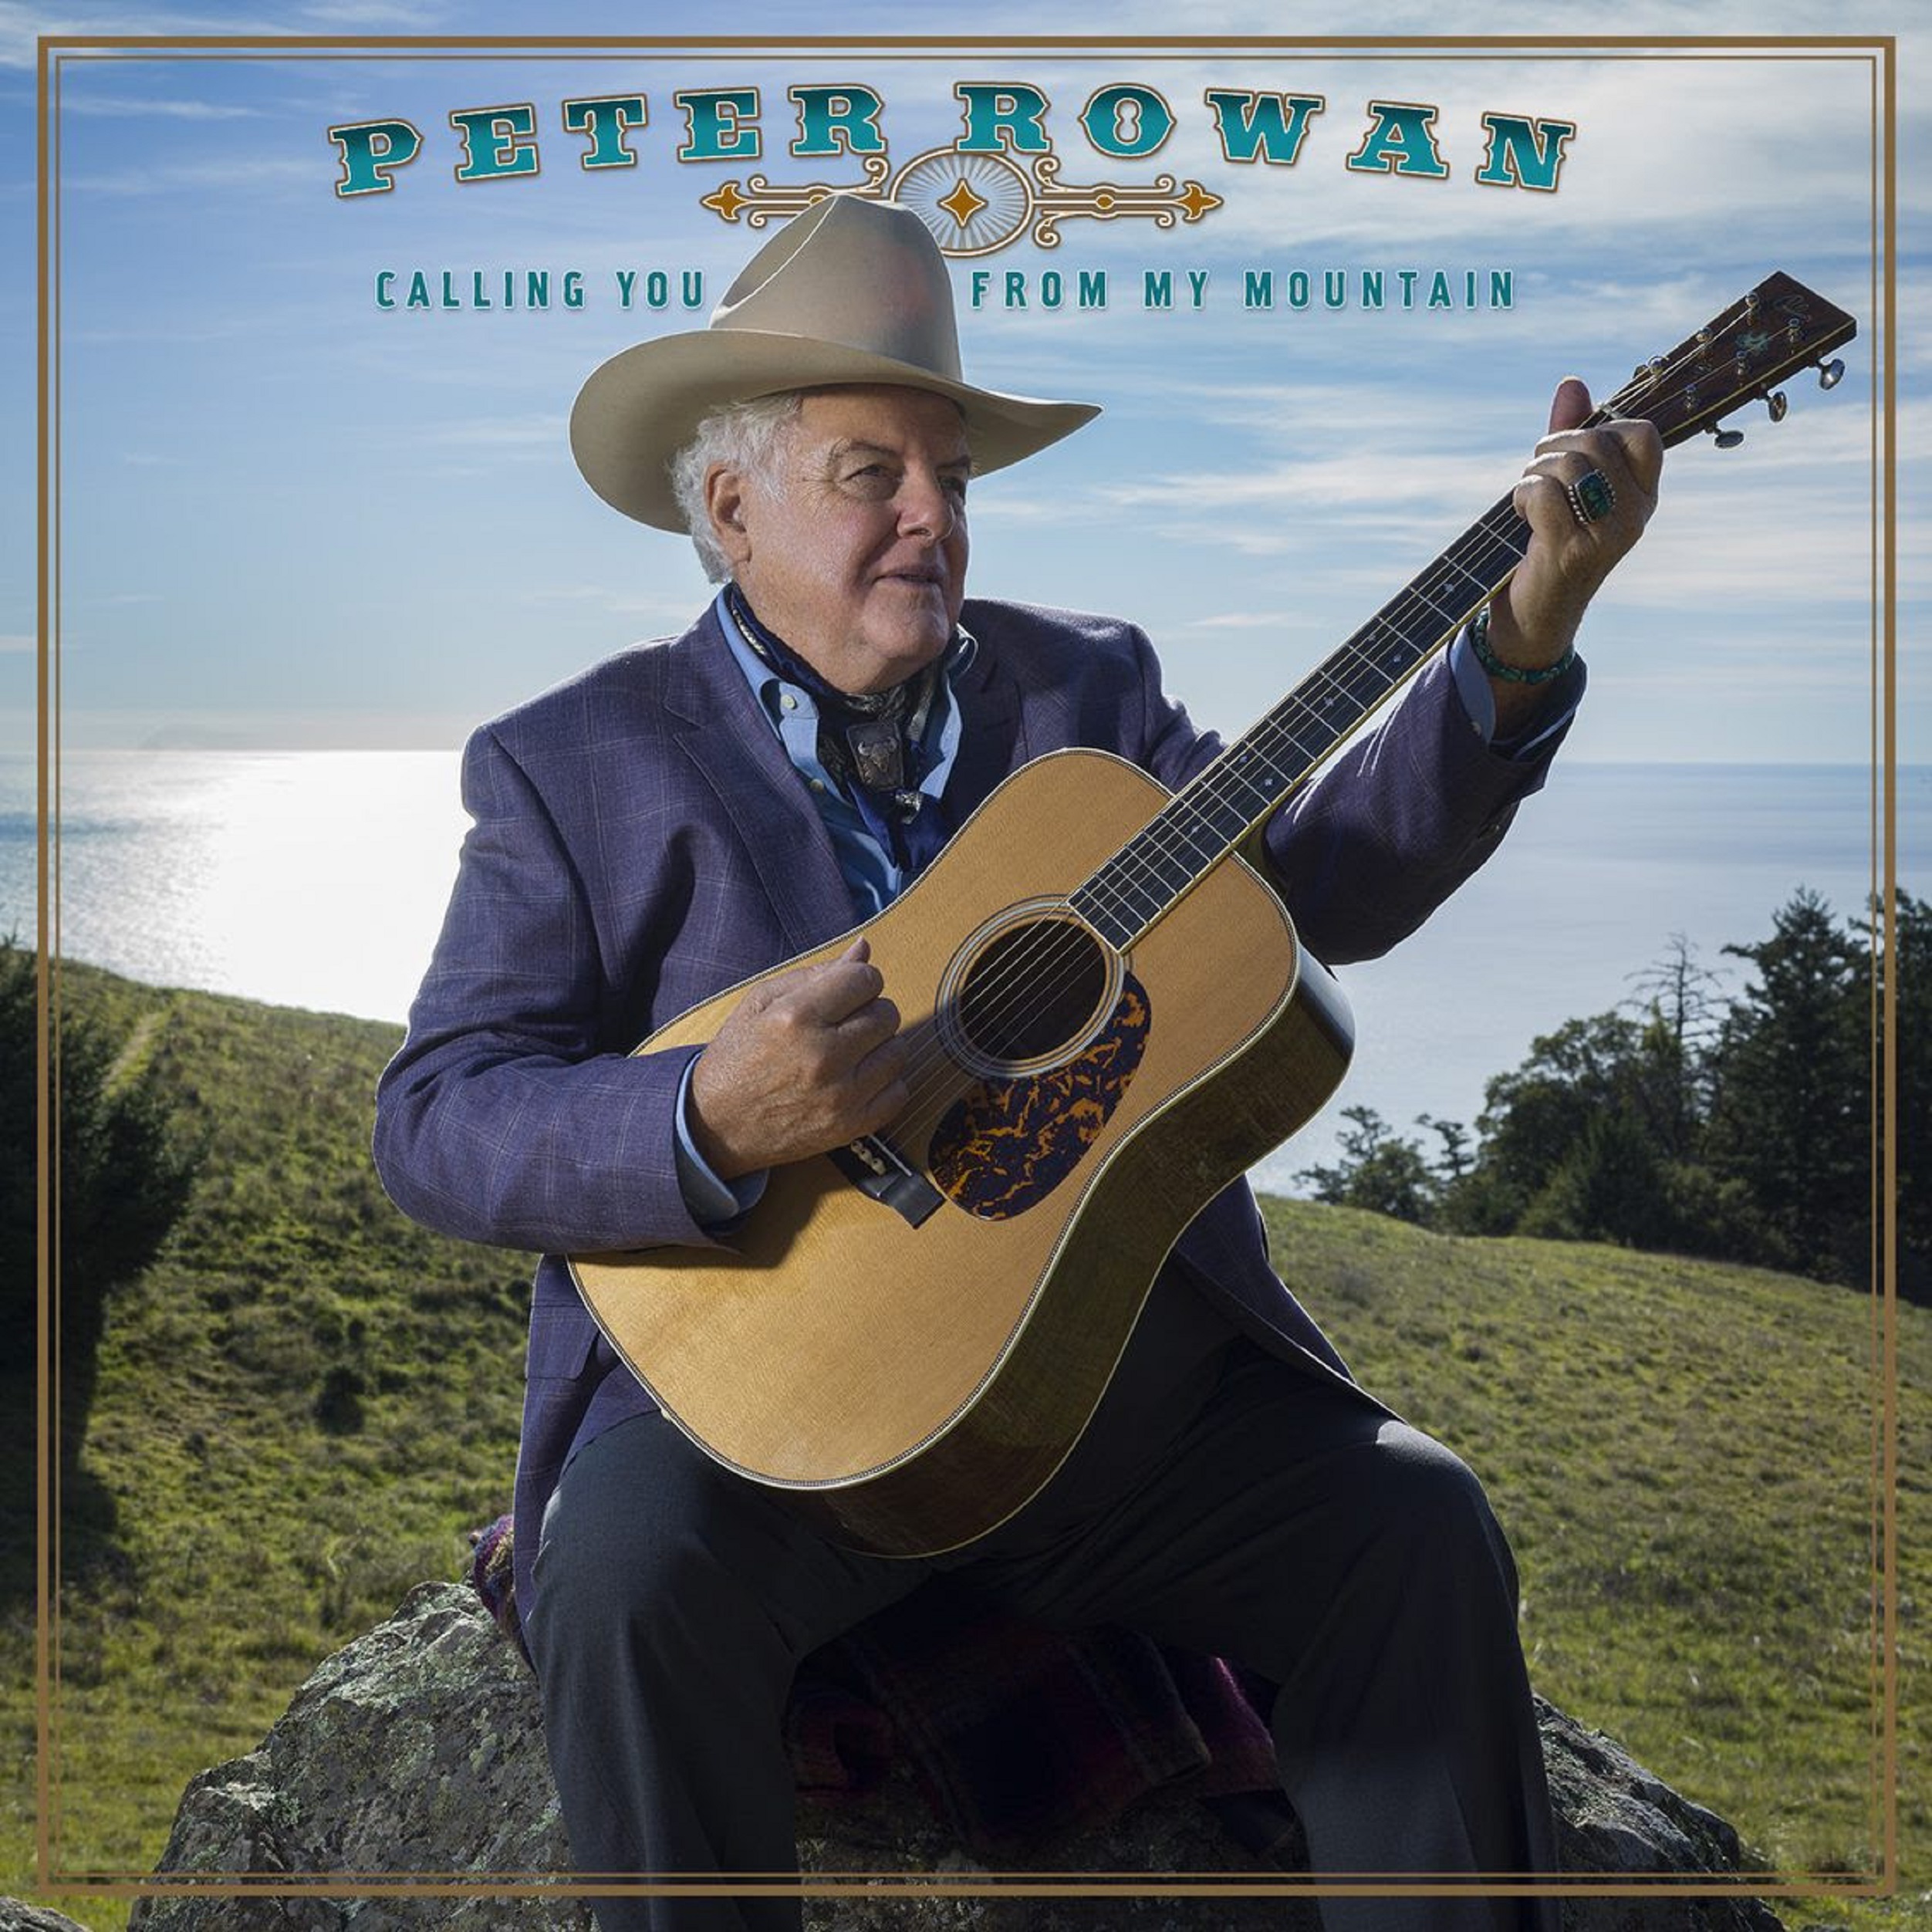 Peter Rowan's Calling You From My Mountain coming out June 24th, 2022